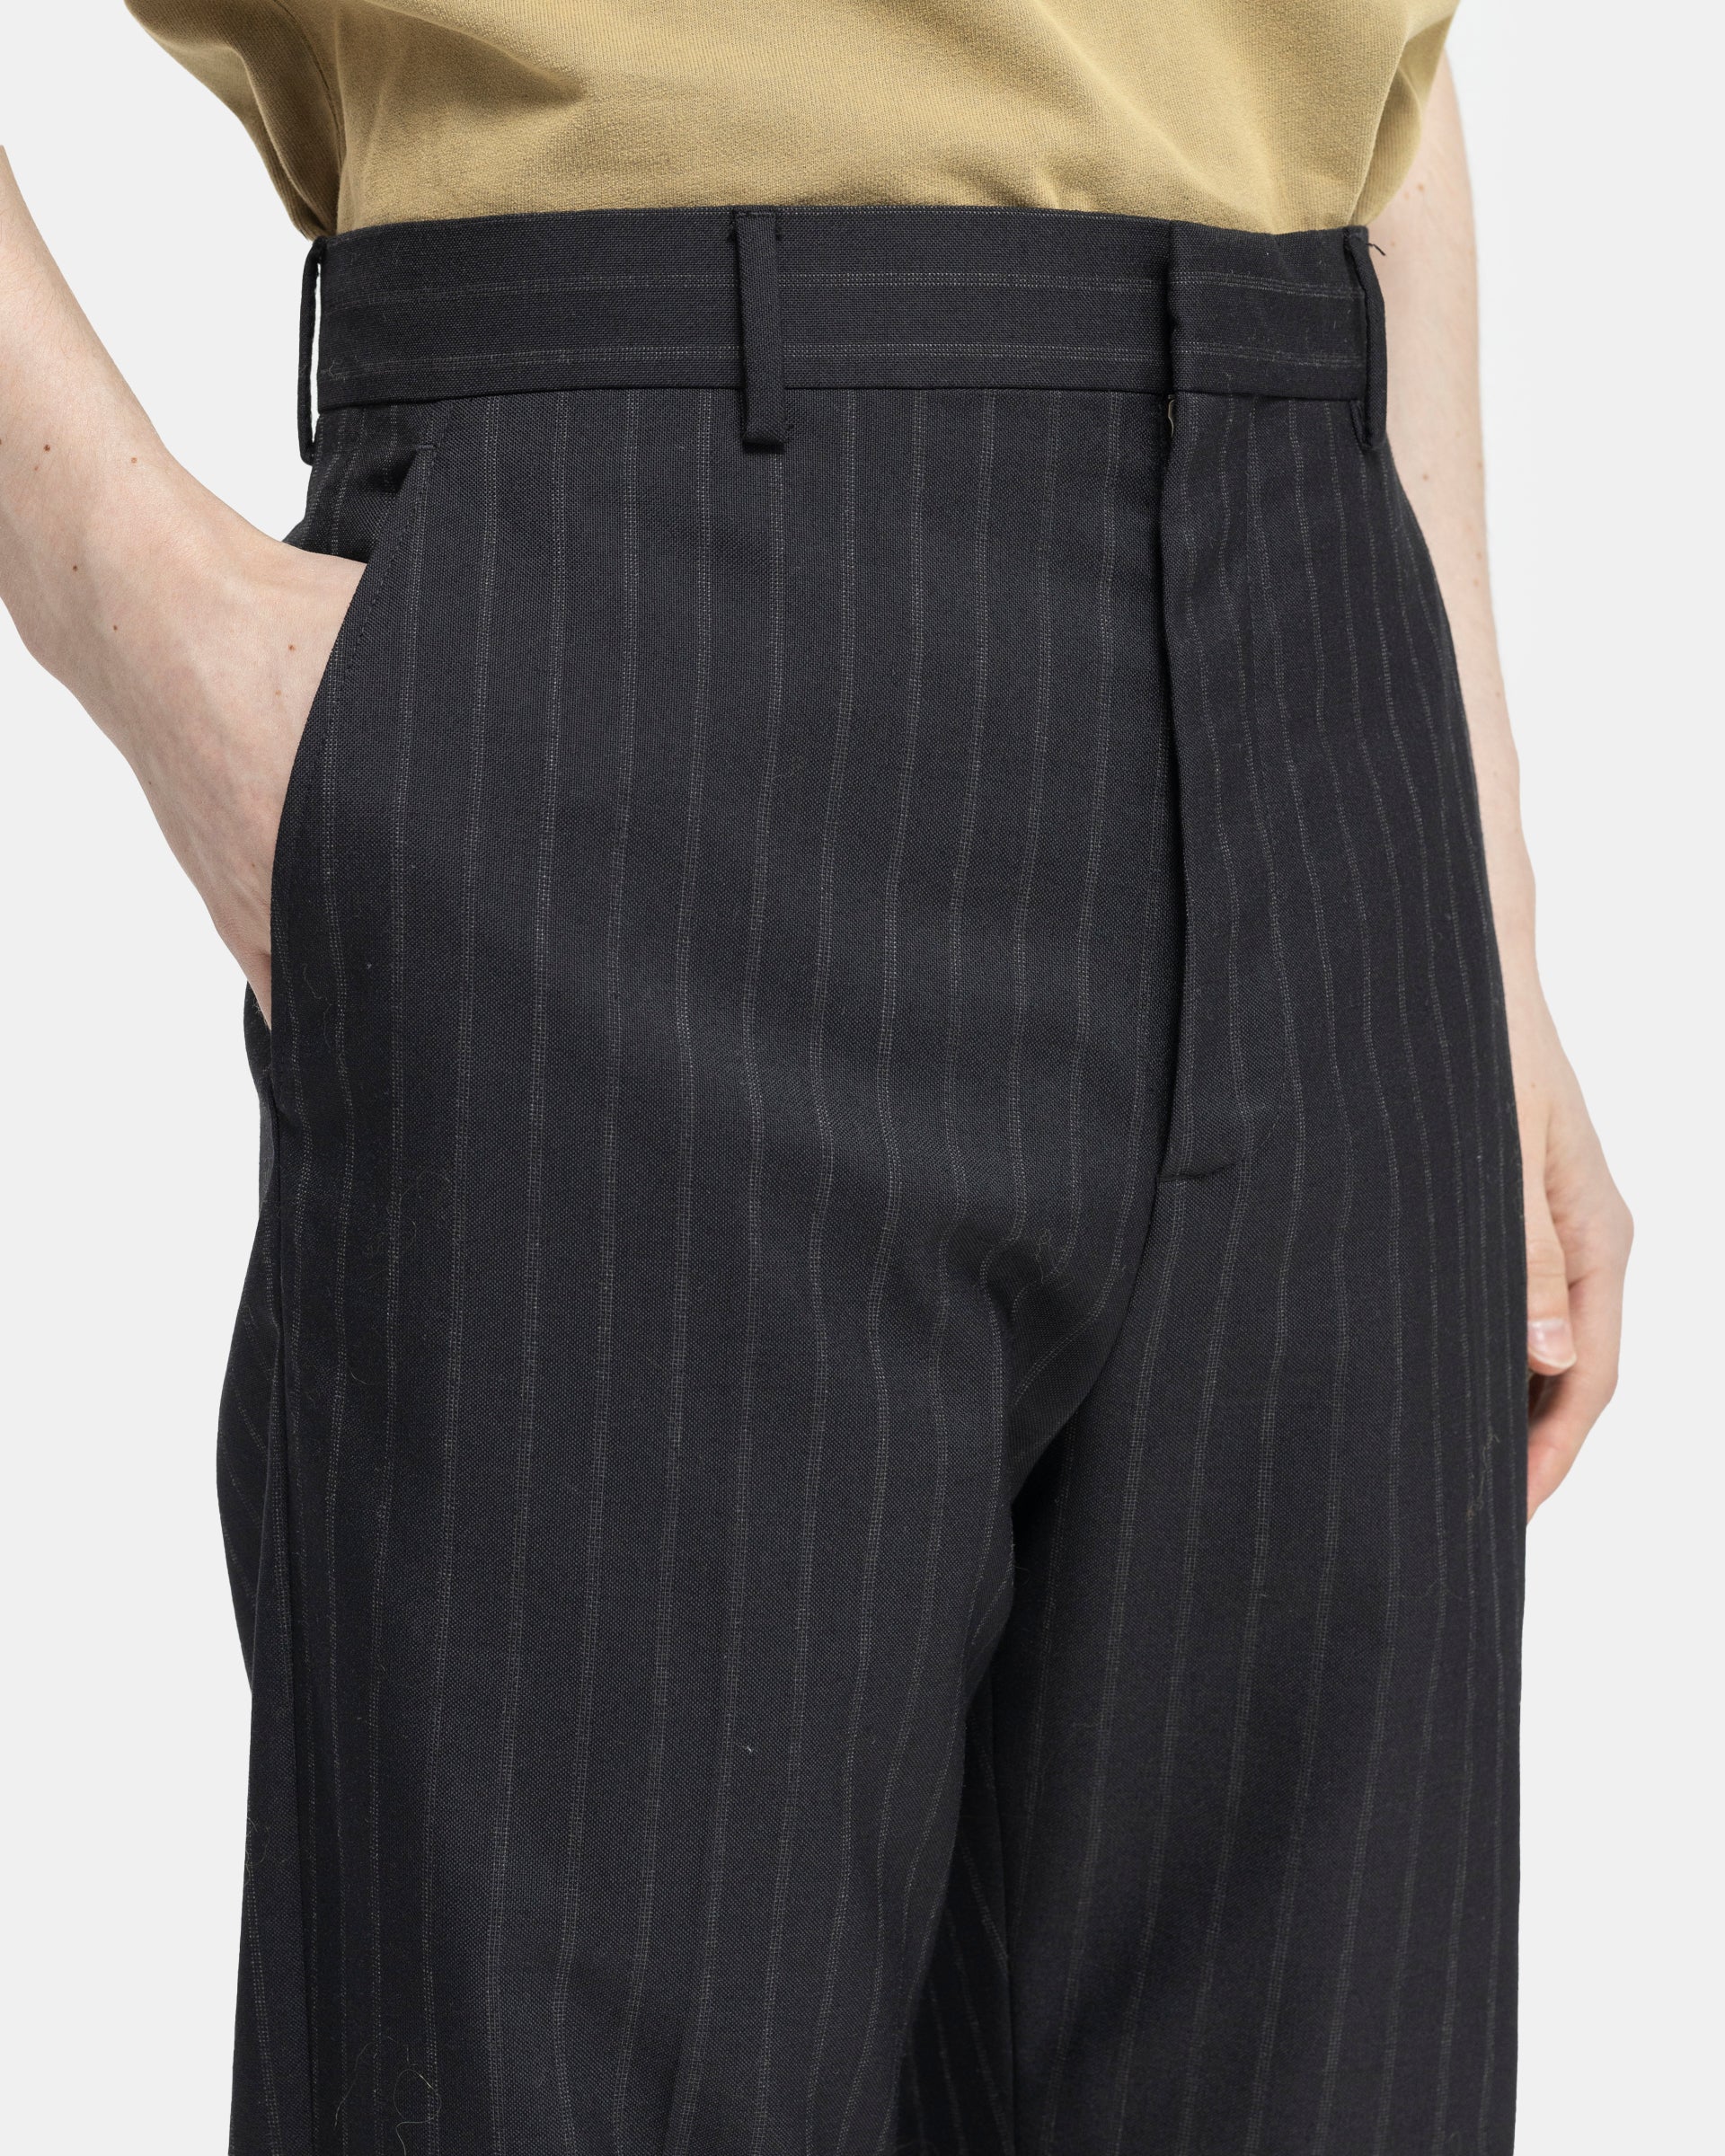 Wool Tailored Trousers in Black & Grey